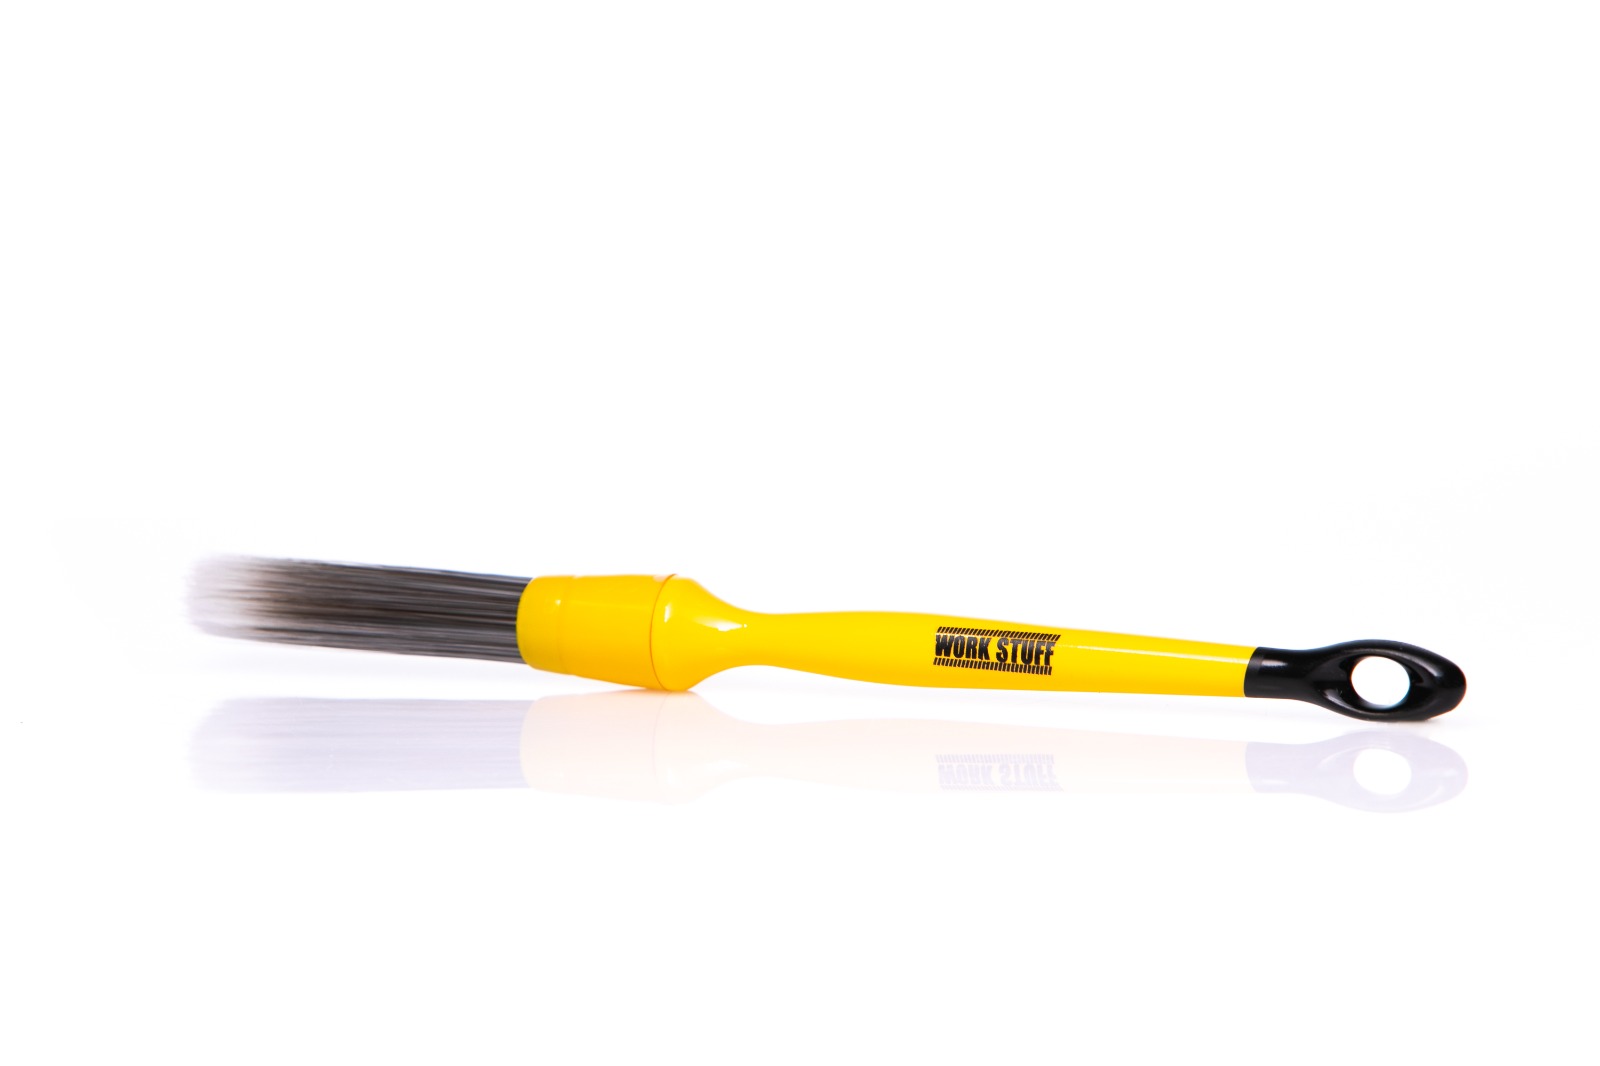 GREY Detailing Brush from WORK STUFF, ideal for cleaning small areas in car interiors and rims